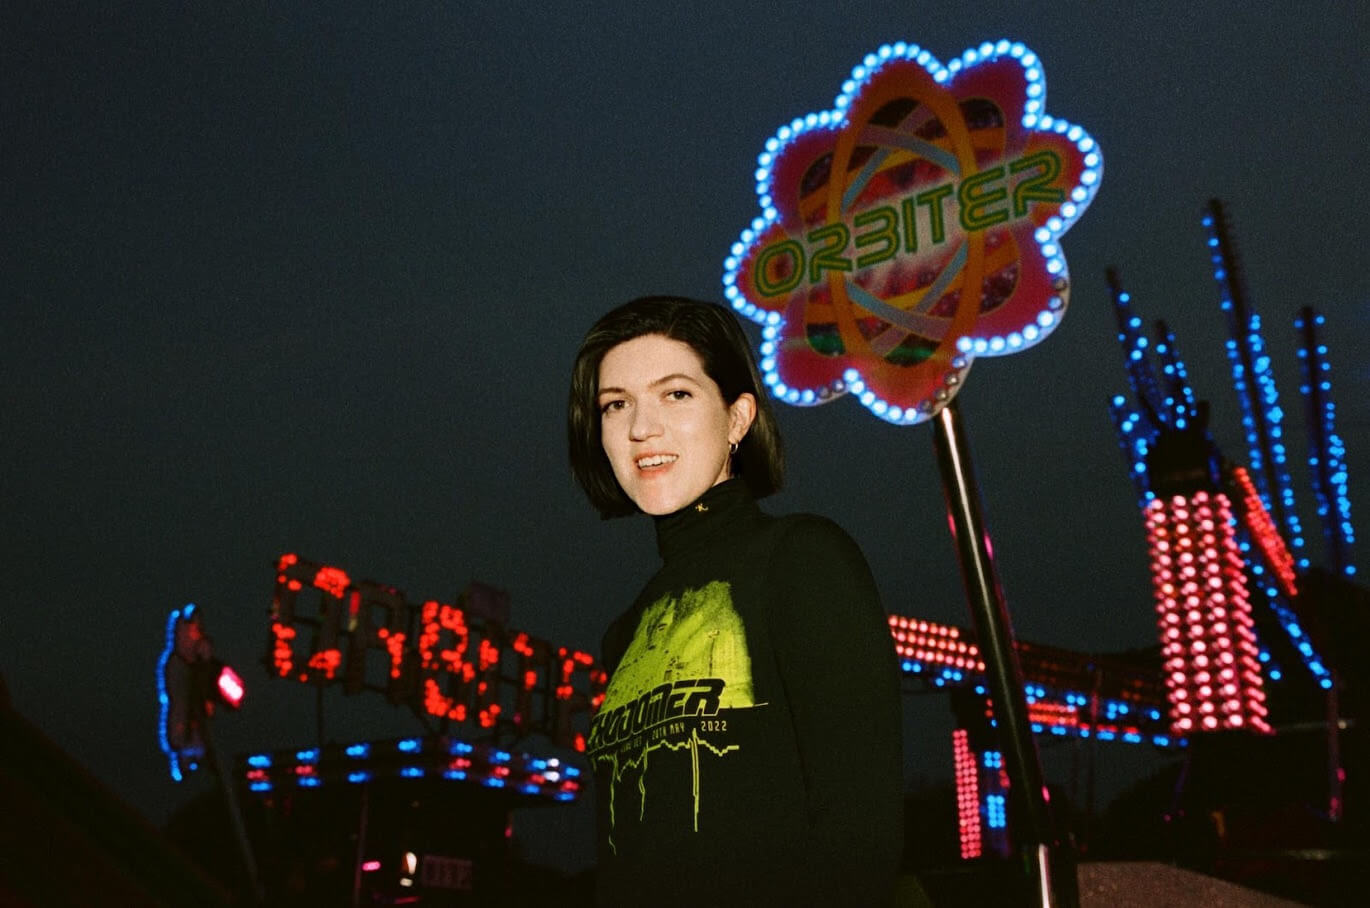 Romy debuts new single "Enjoy Your Life." The xx member's brand new track is available today via Young and streaming services